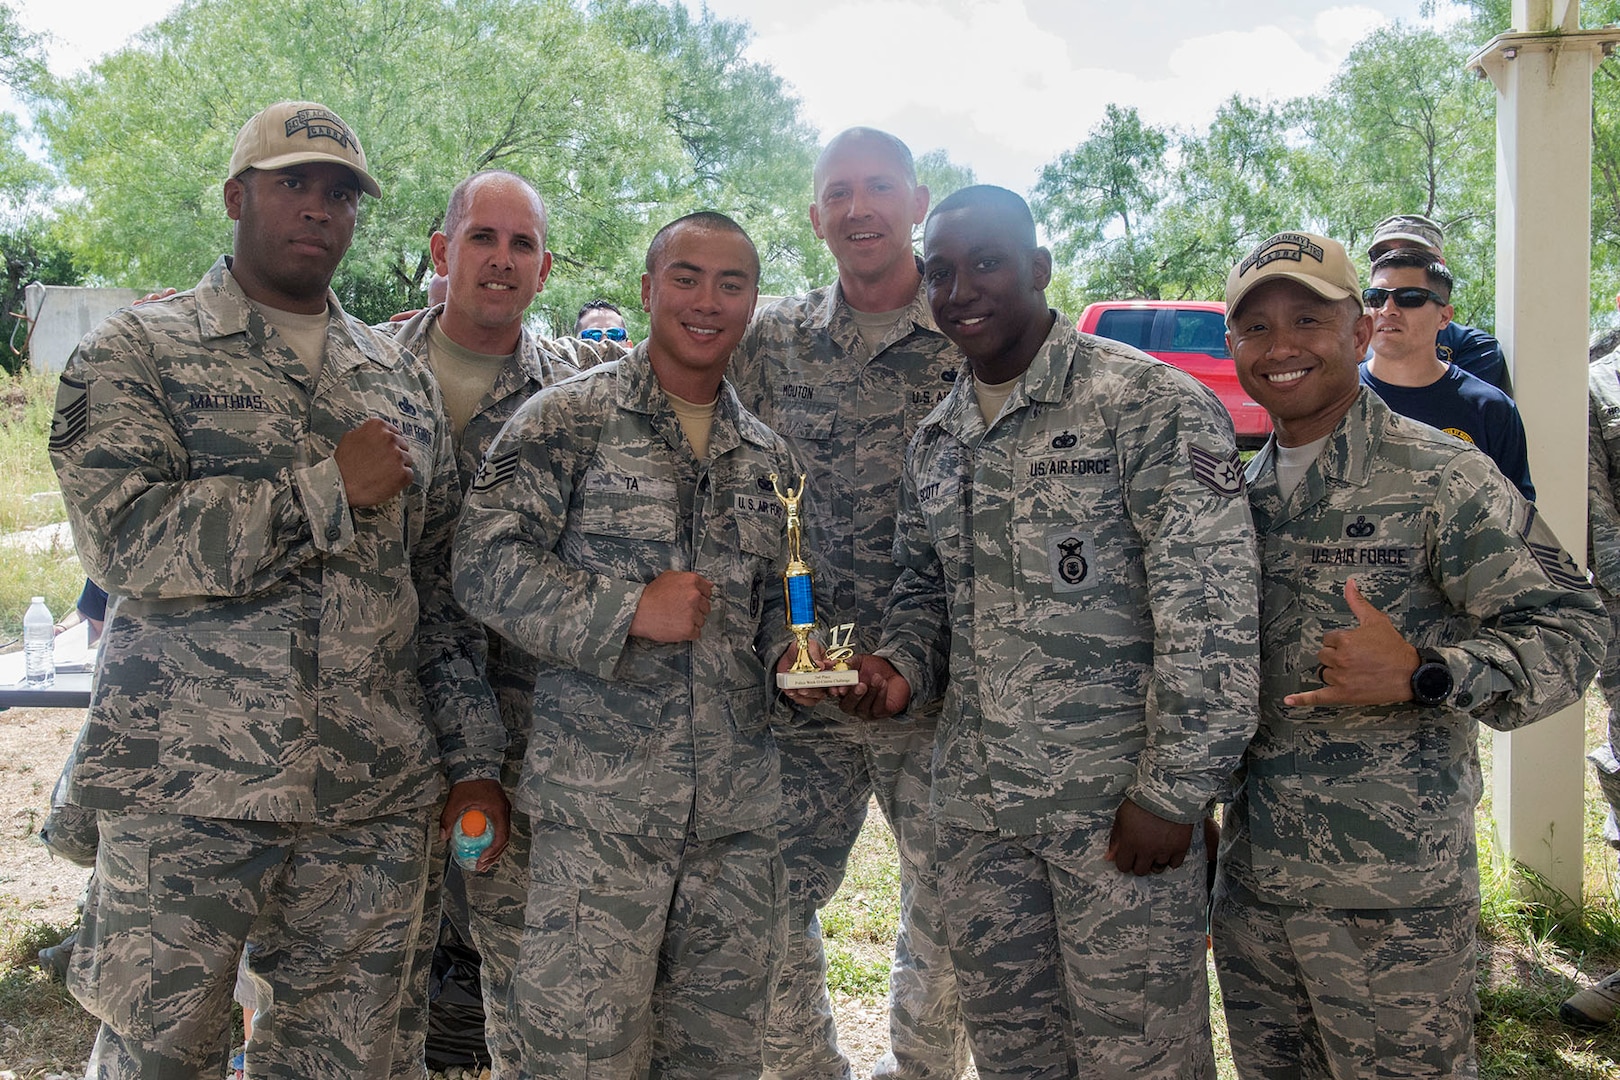 Members of the 343rd Training Squadron accept their second place trophy after competing in the Obstacle Course Team Challenge May 15, 2017, at Joint Base San Antonio-Lackland, Texas, Medina Annex. The event was held as part of National Police Week, an annual celebration to honor the service and sacrifice of law enforcement members and pays special tribute to law enforcement officers who have lost their lives in the line of duty for the safety and protection of others. JBSA security forces members participated participate in events weeklong May 15-19 across the installations. (U.S. Air Force photo by Staff Sgt. Marissa Garner)